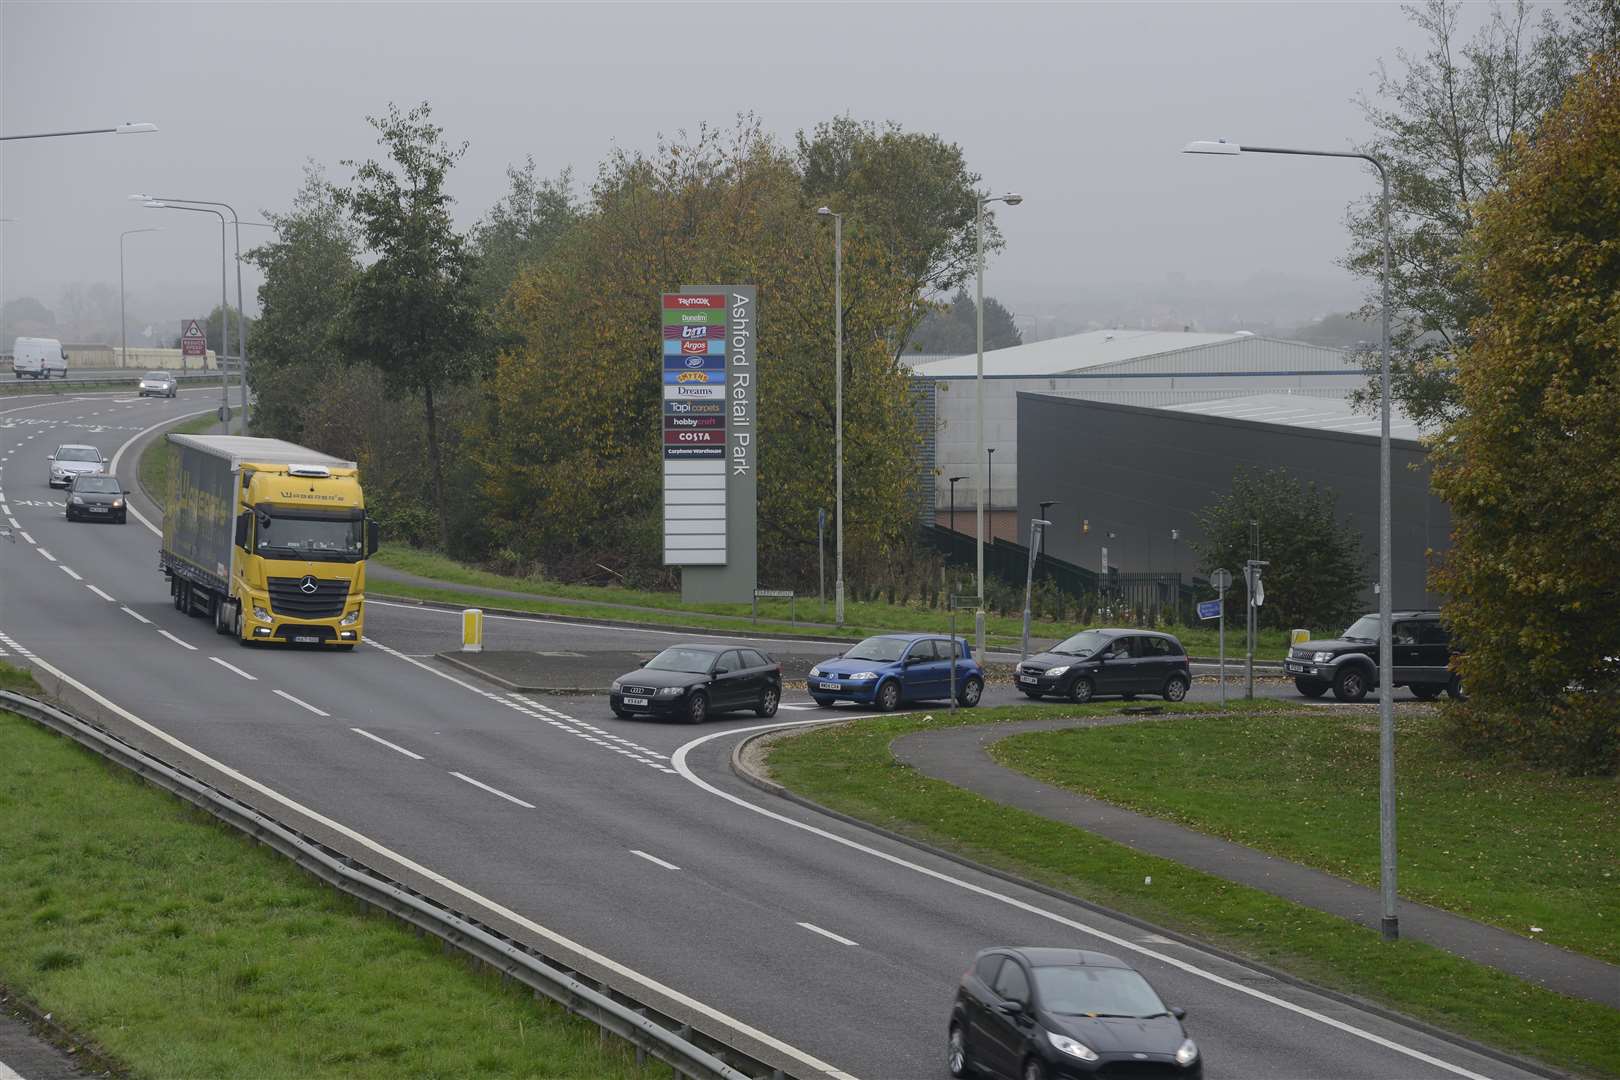 Traffic leaving the Sevington Retail Park has to join the busy A2070, which has a 70mph speed limit